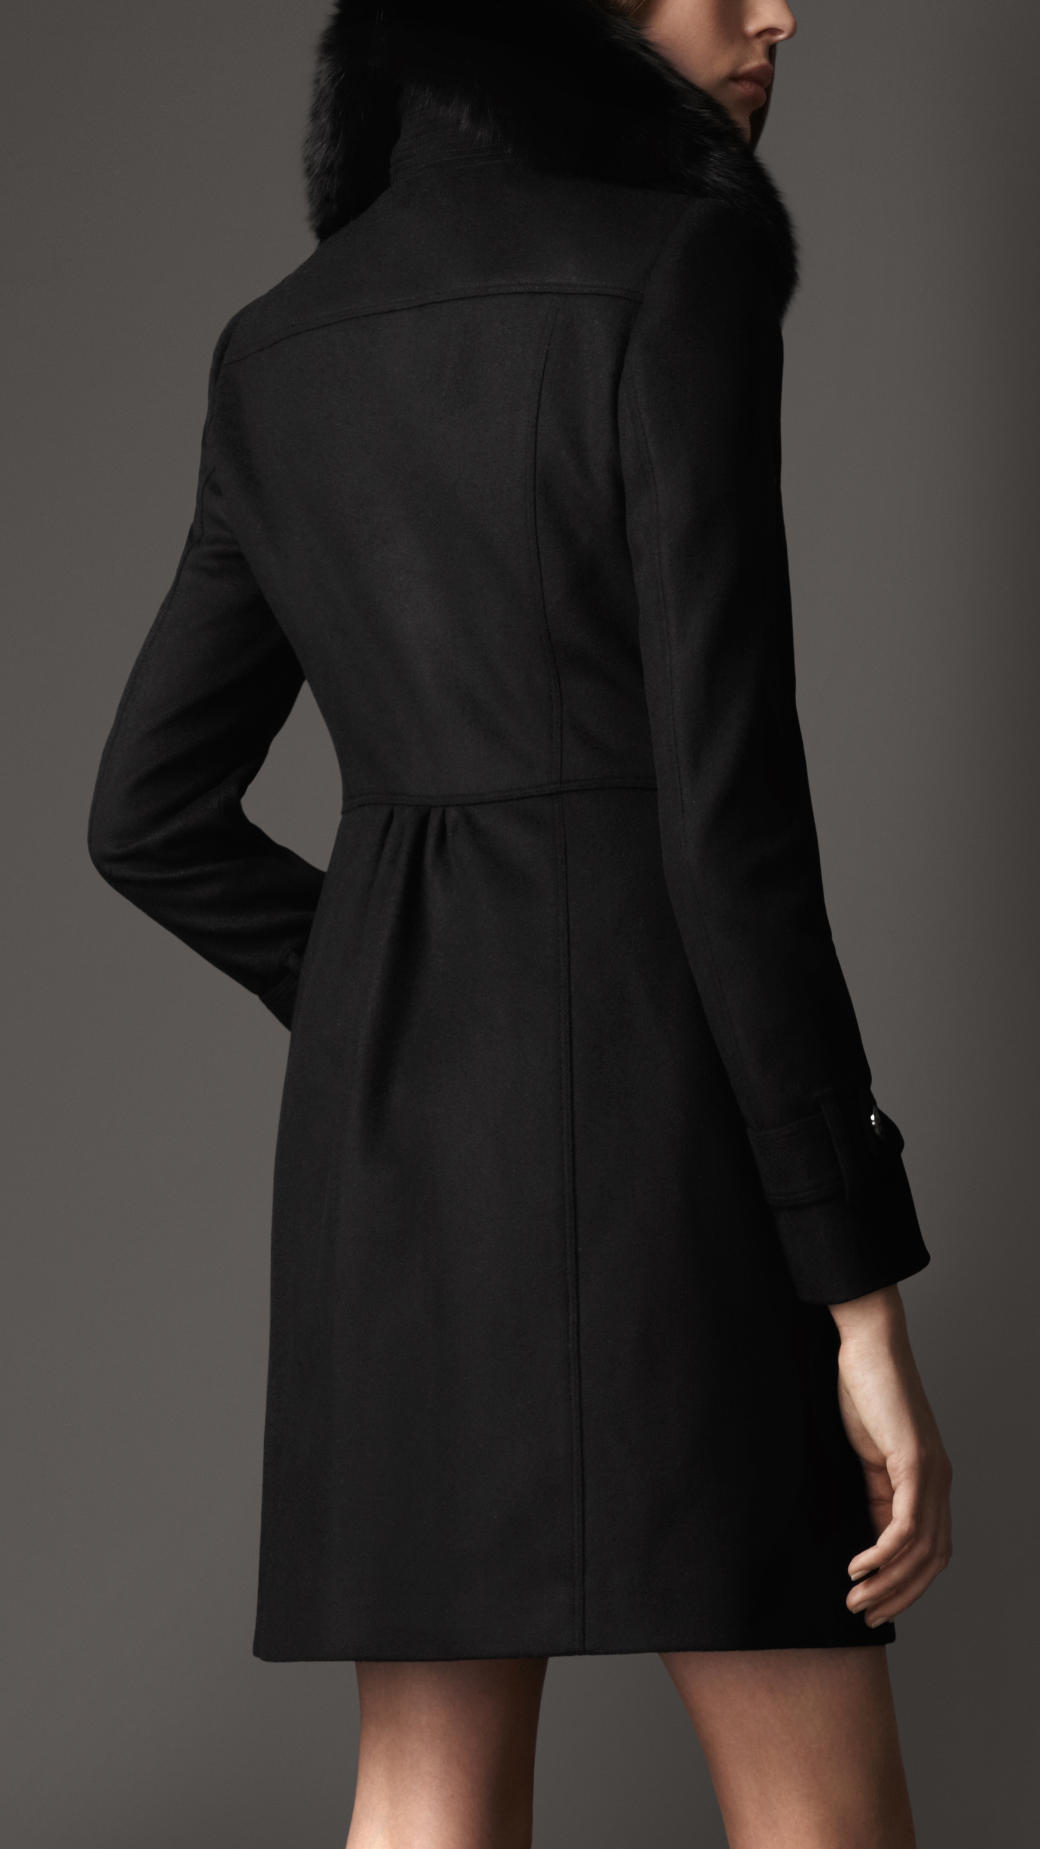 Lyst - Burberry Long Fur Collar Trench Coat in Black